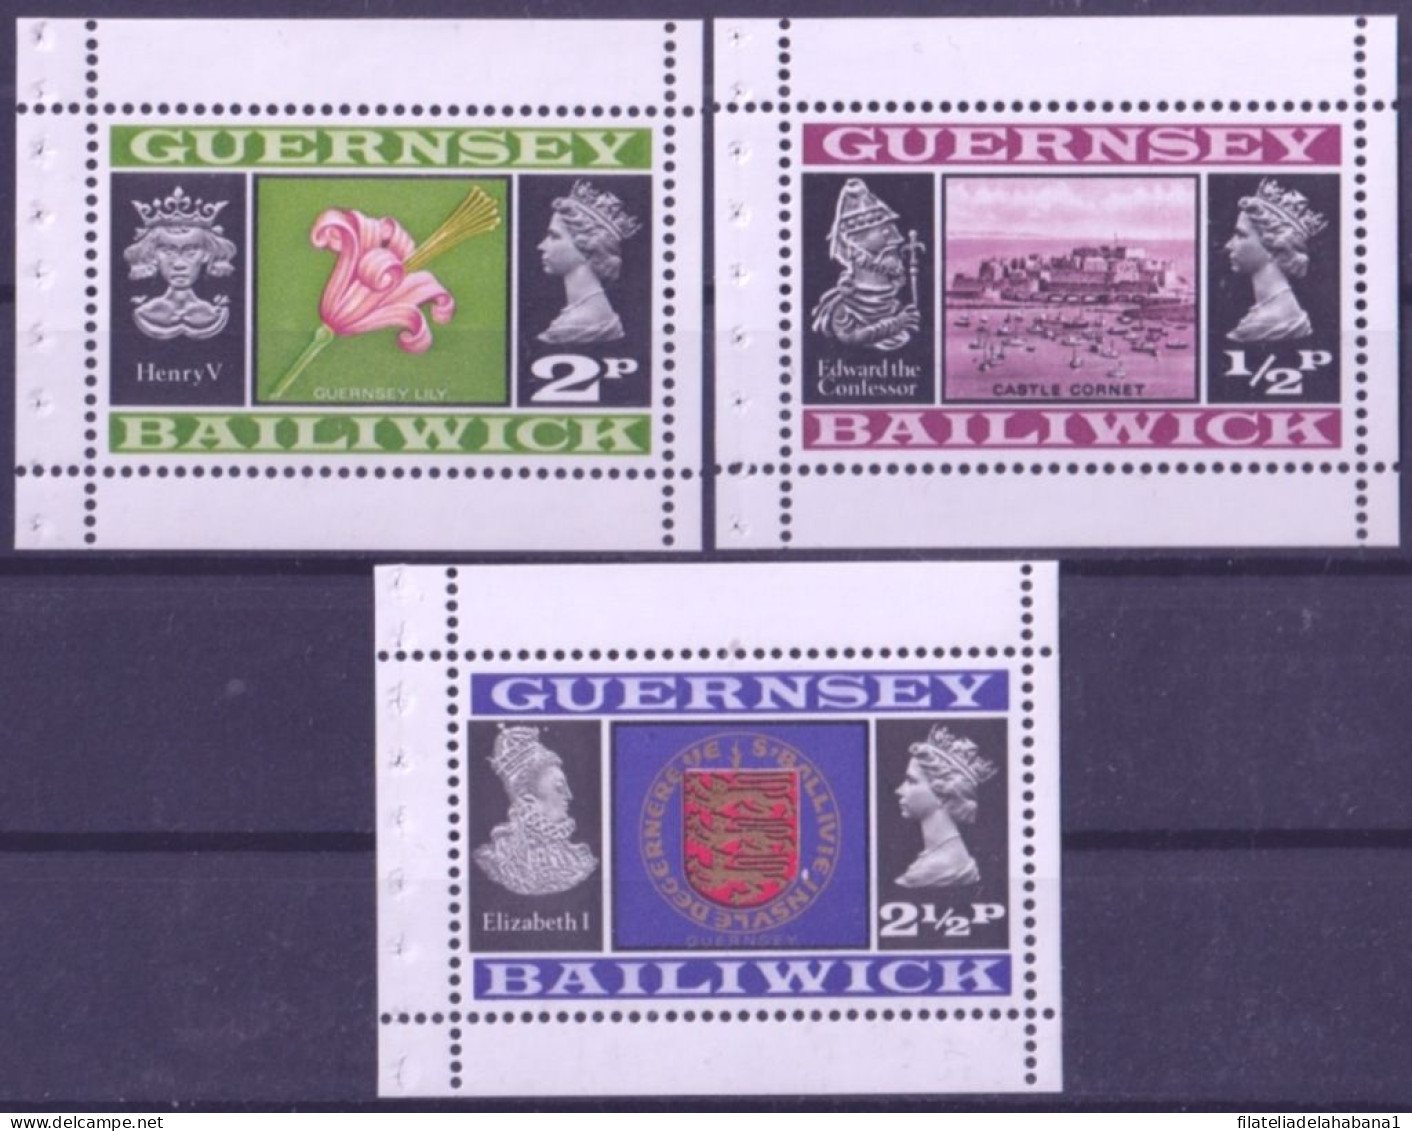 F-EX50274 GUERNSEY ENGLAND UK GB MNH 1971 BOOKLET LILY FLOWER MAP COAST ARMS.  - Guernesey